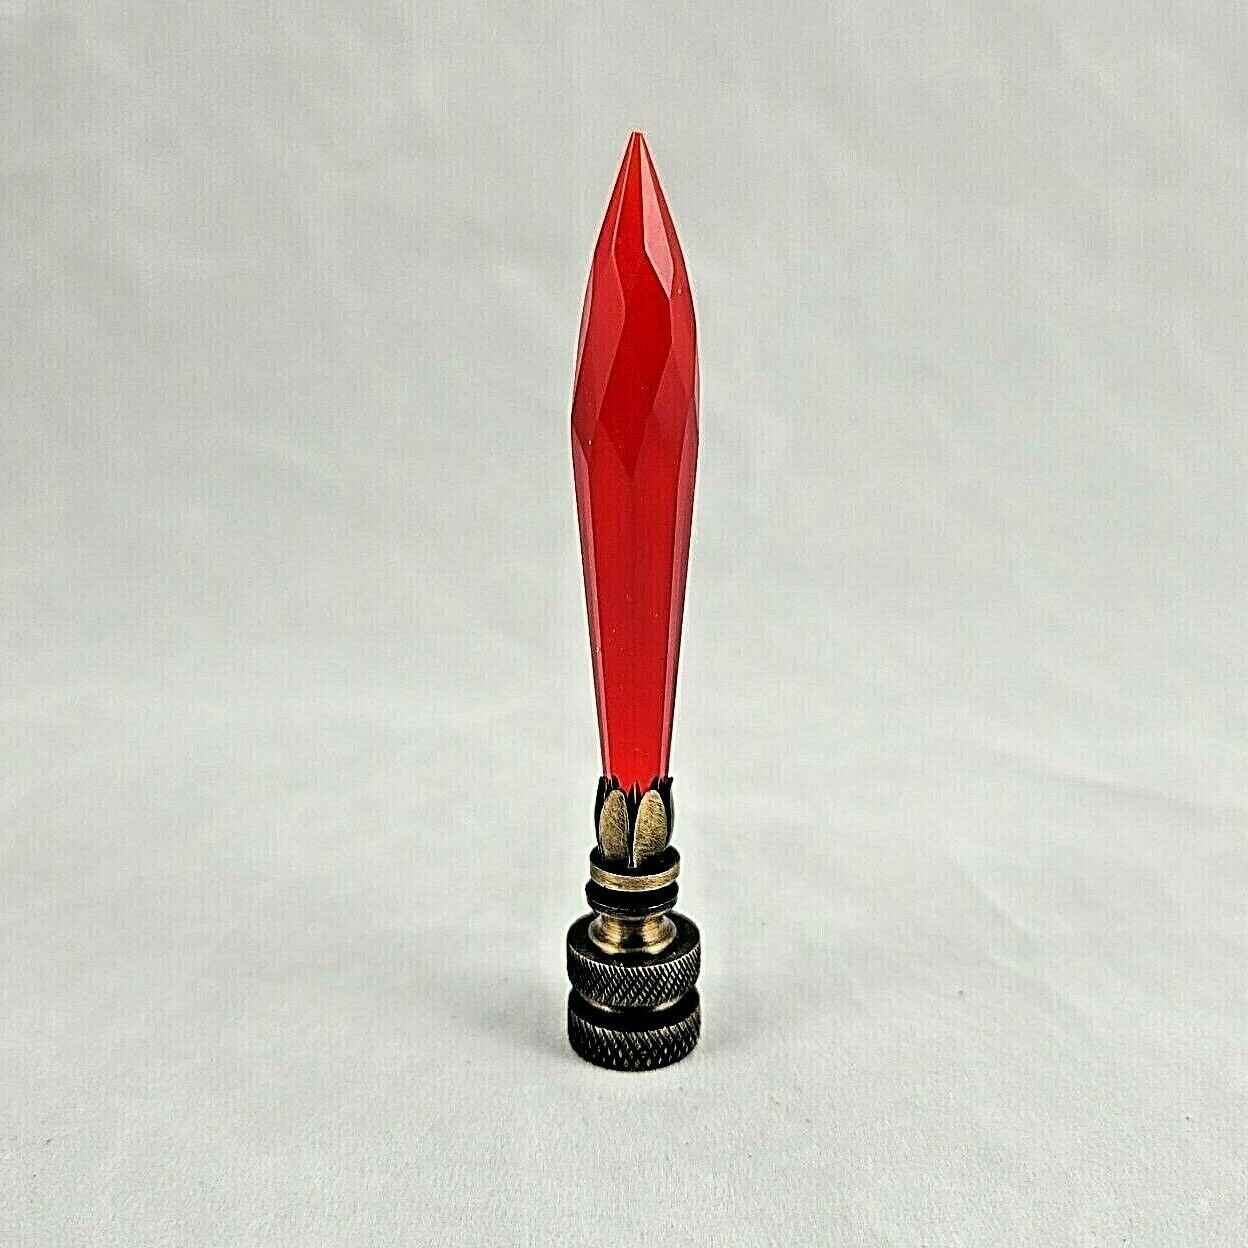 RED  CRYSTAL  FACETED  ELECTRIC  LIGHTING  LAMP  SHADE  FINIAL  (NEW)